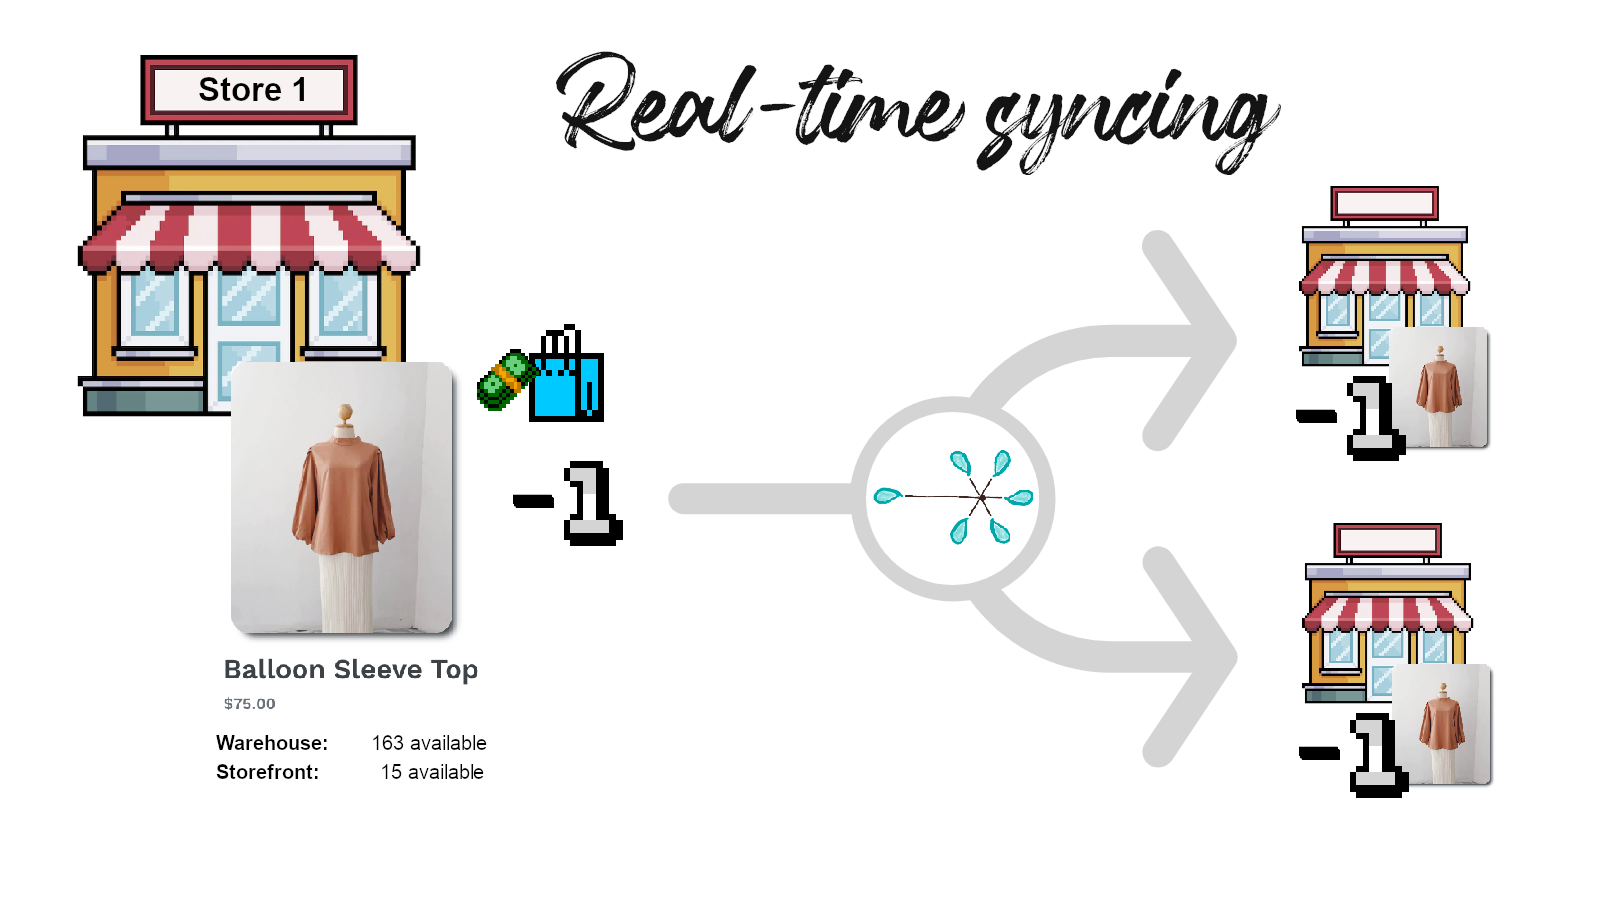 Sync inventories and product properties in real time!